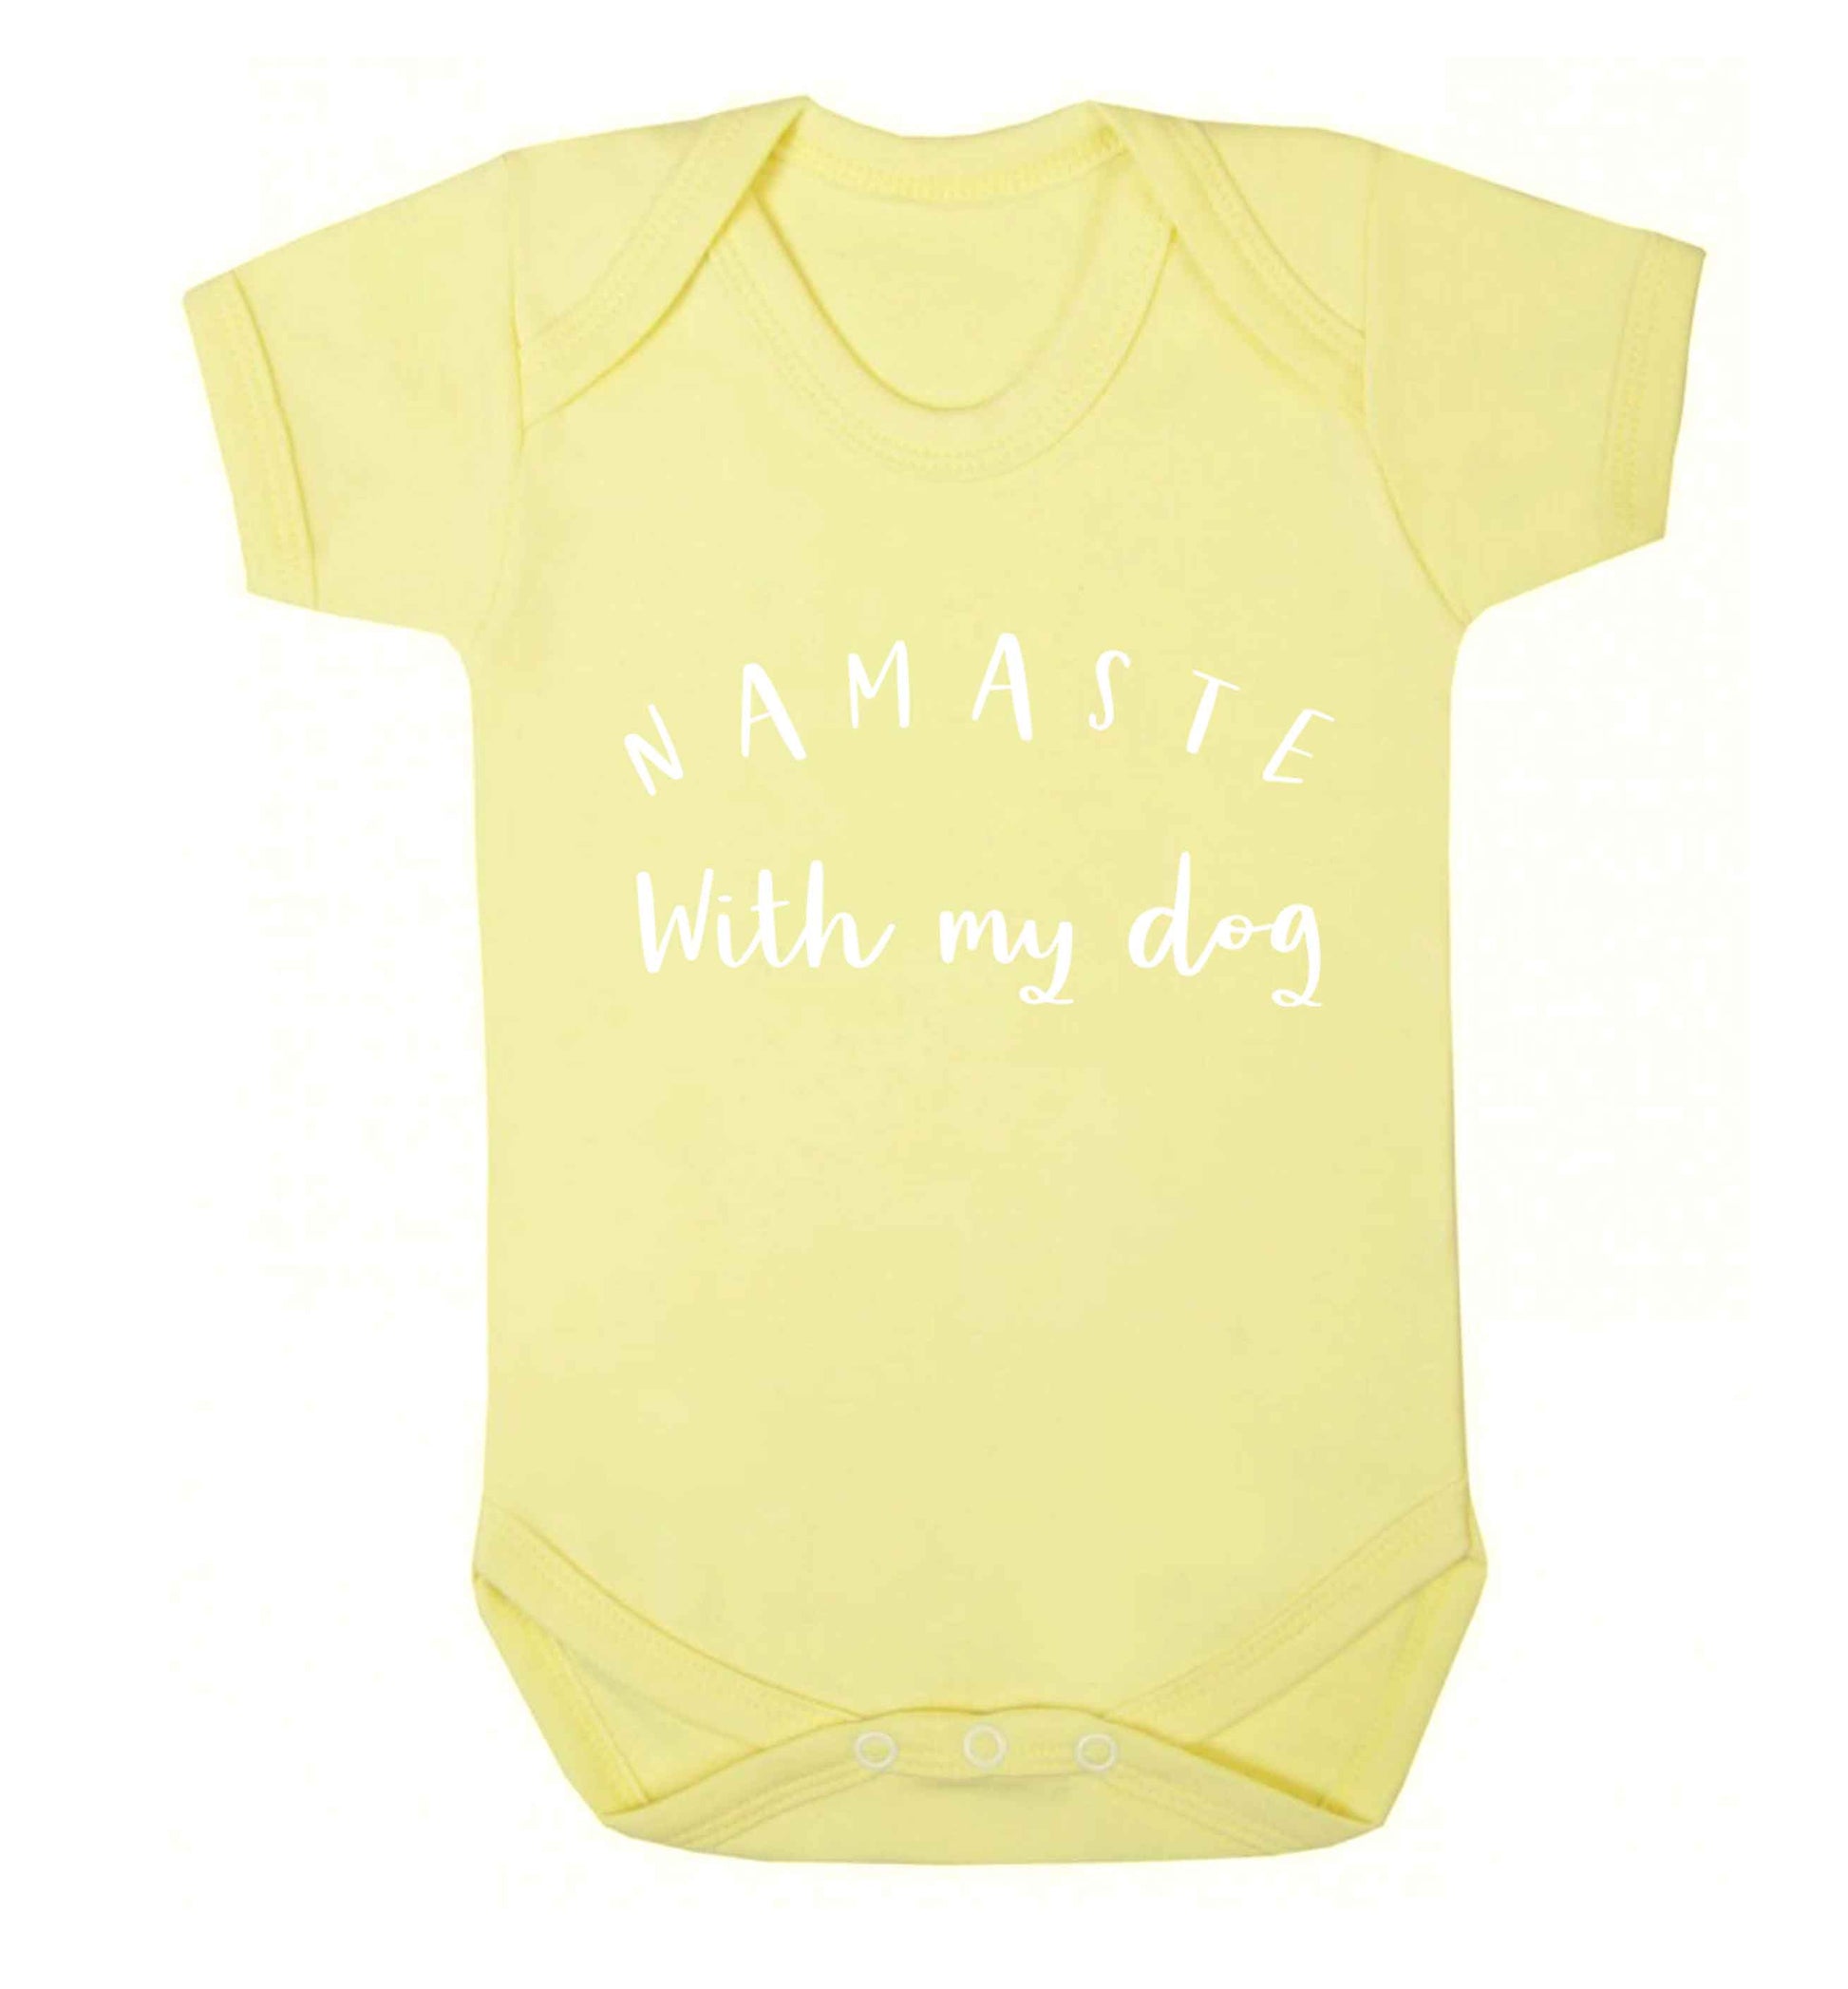 Namaste with my dog Baby Vest pale yellow 18-24 months